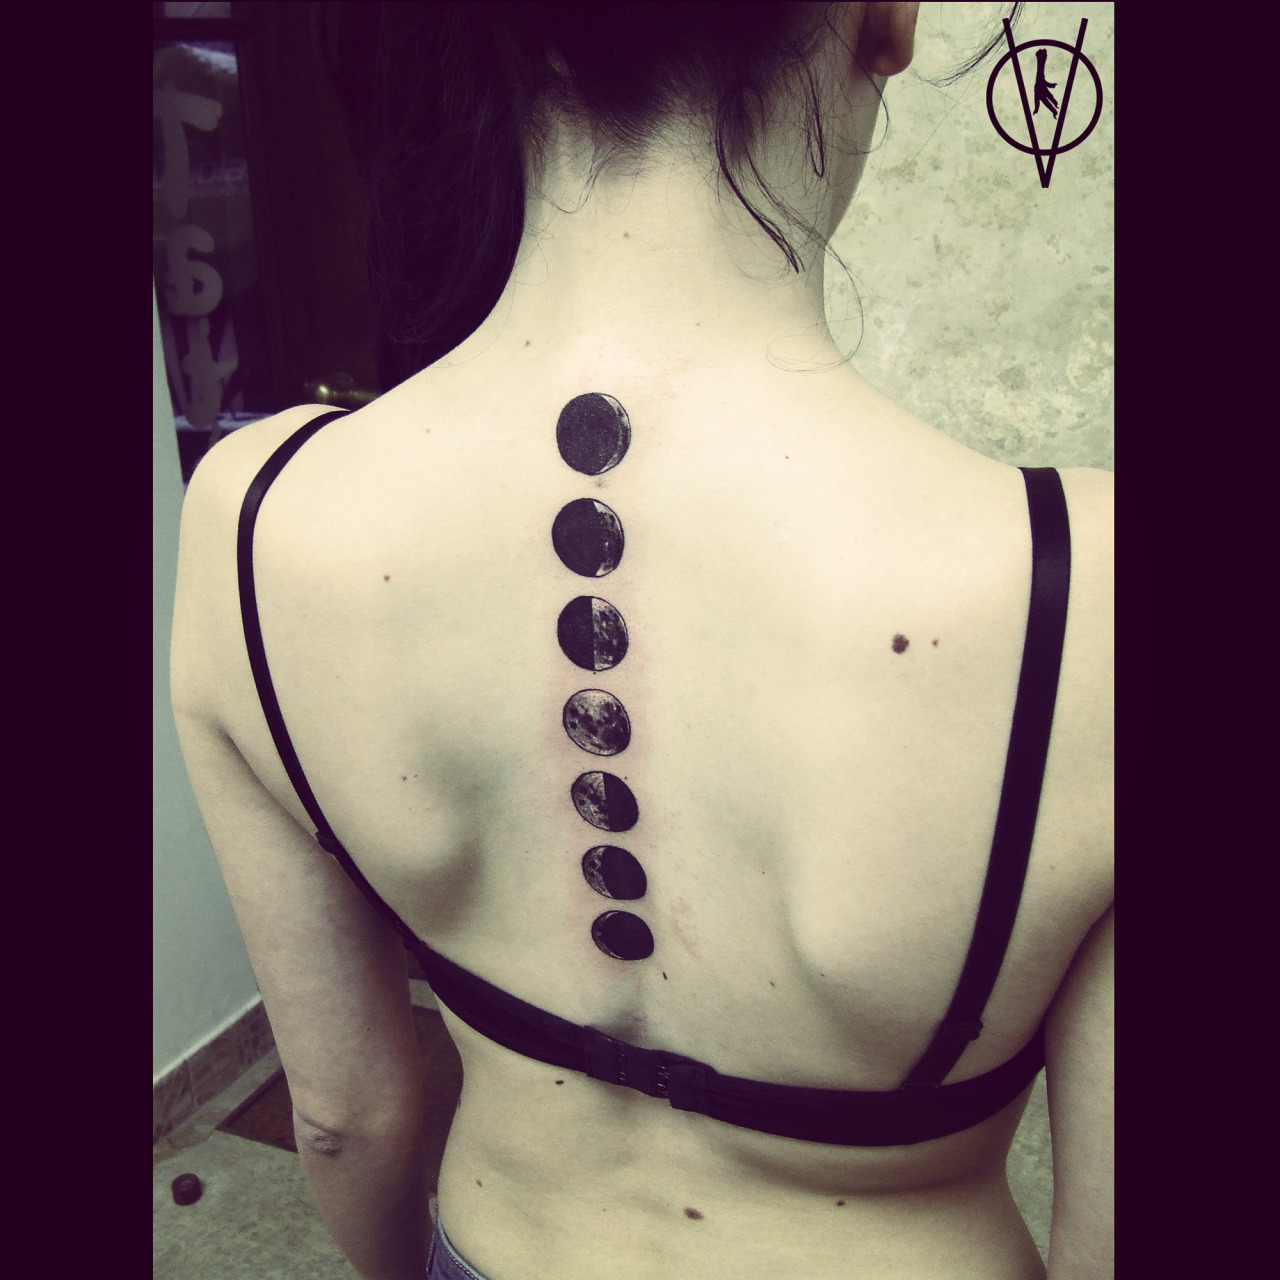 Black Ink Phases Of The Moon Tattoo On G irl Spine.